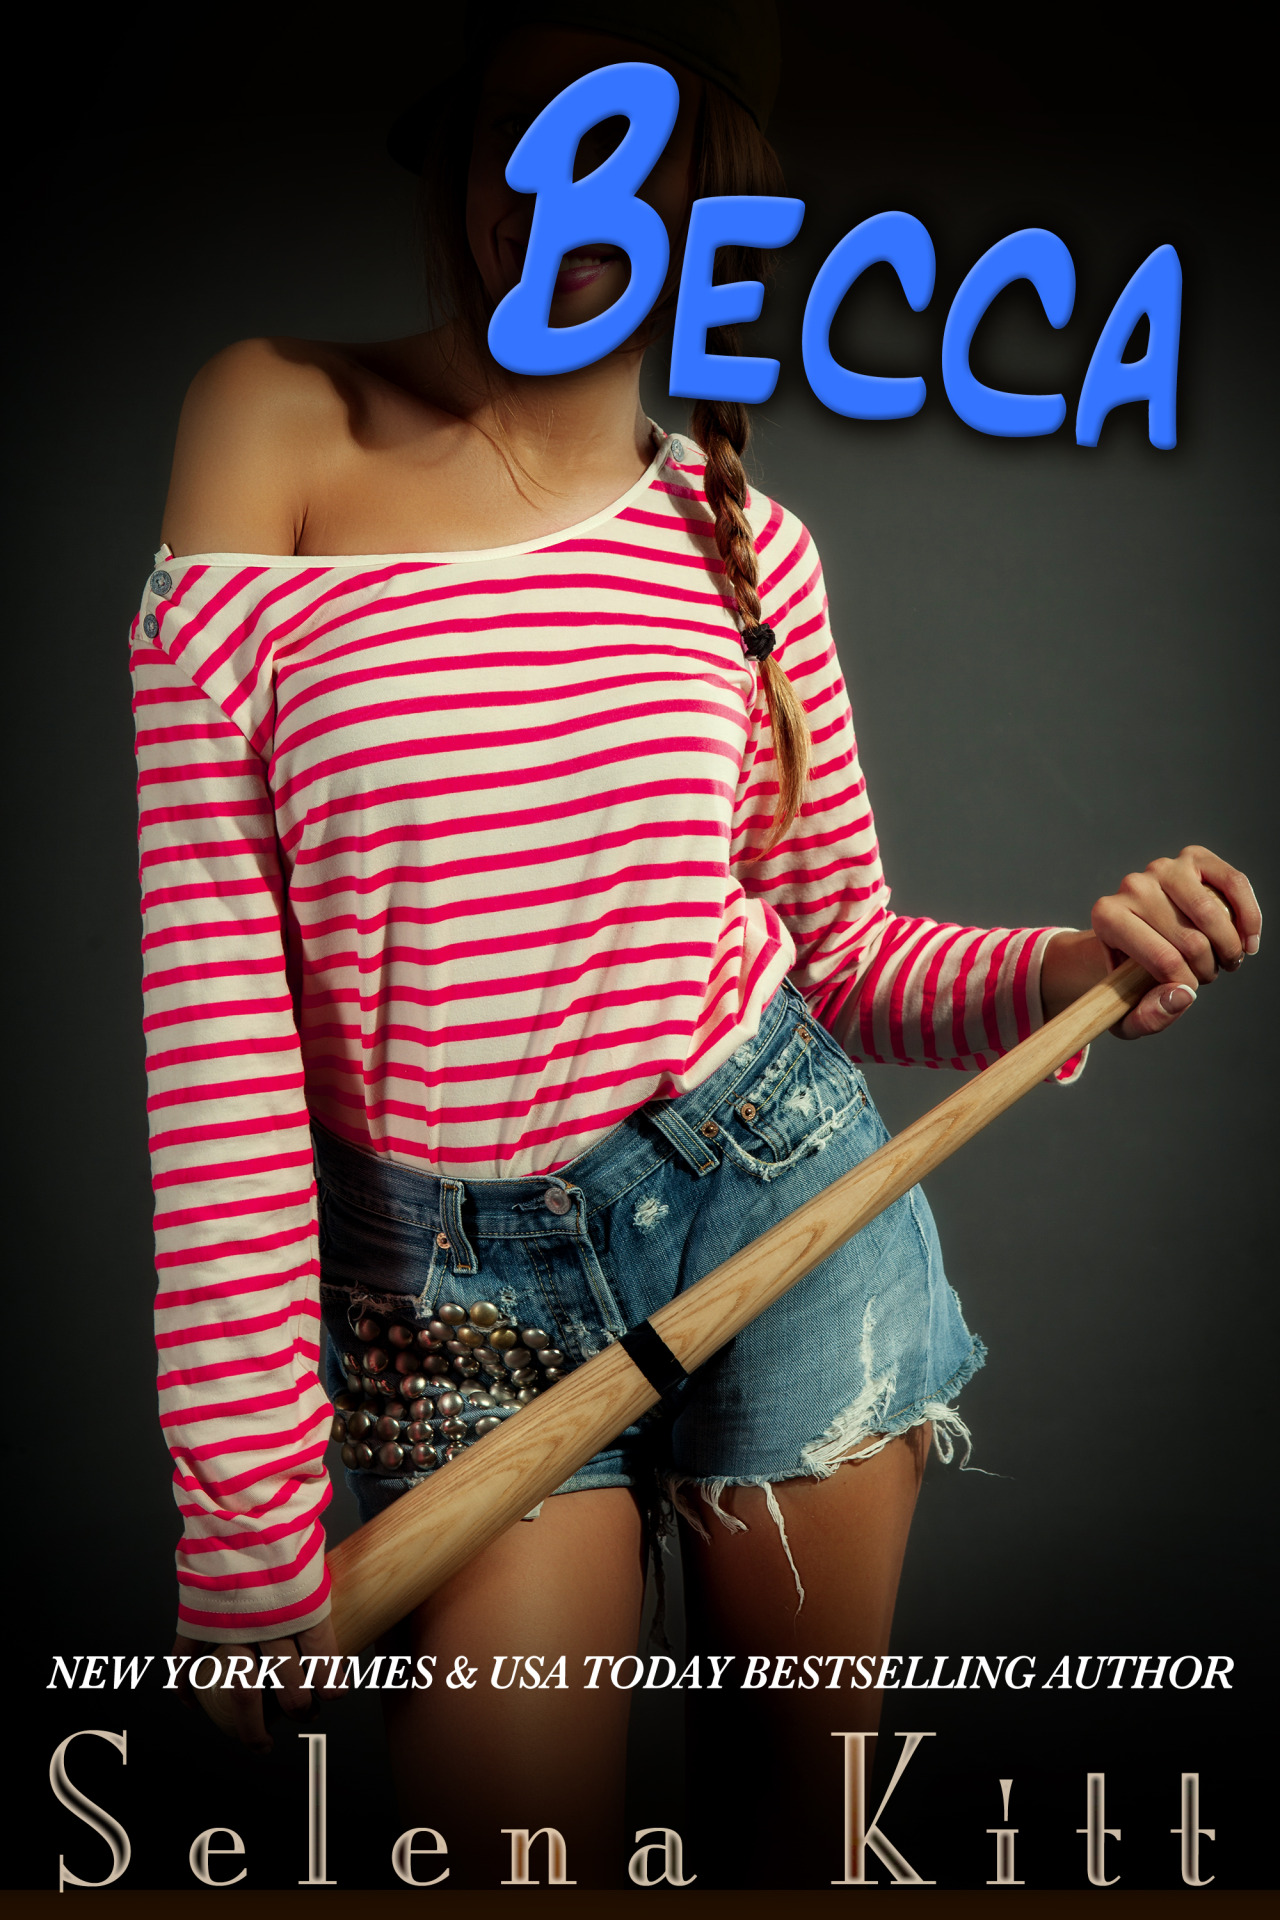 BECCA by Selena Kitt - Get it FREE if you have Kindle Unlimited! Wicked, Naughty